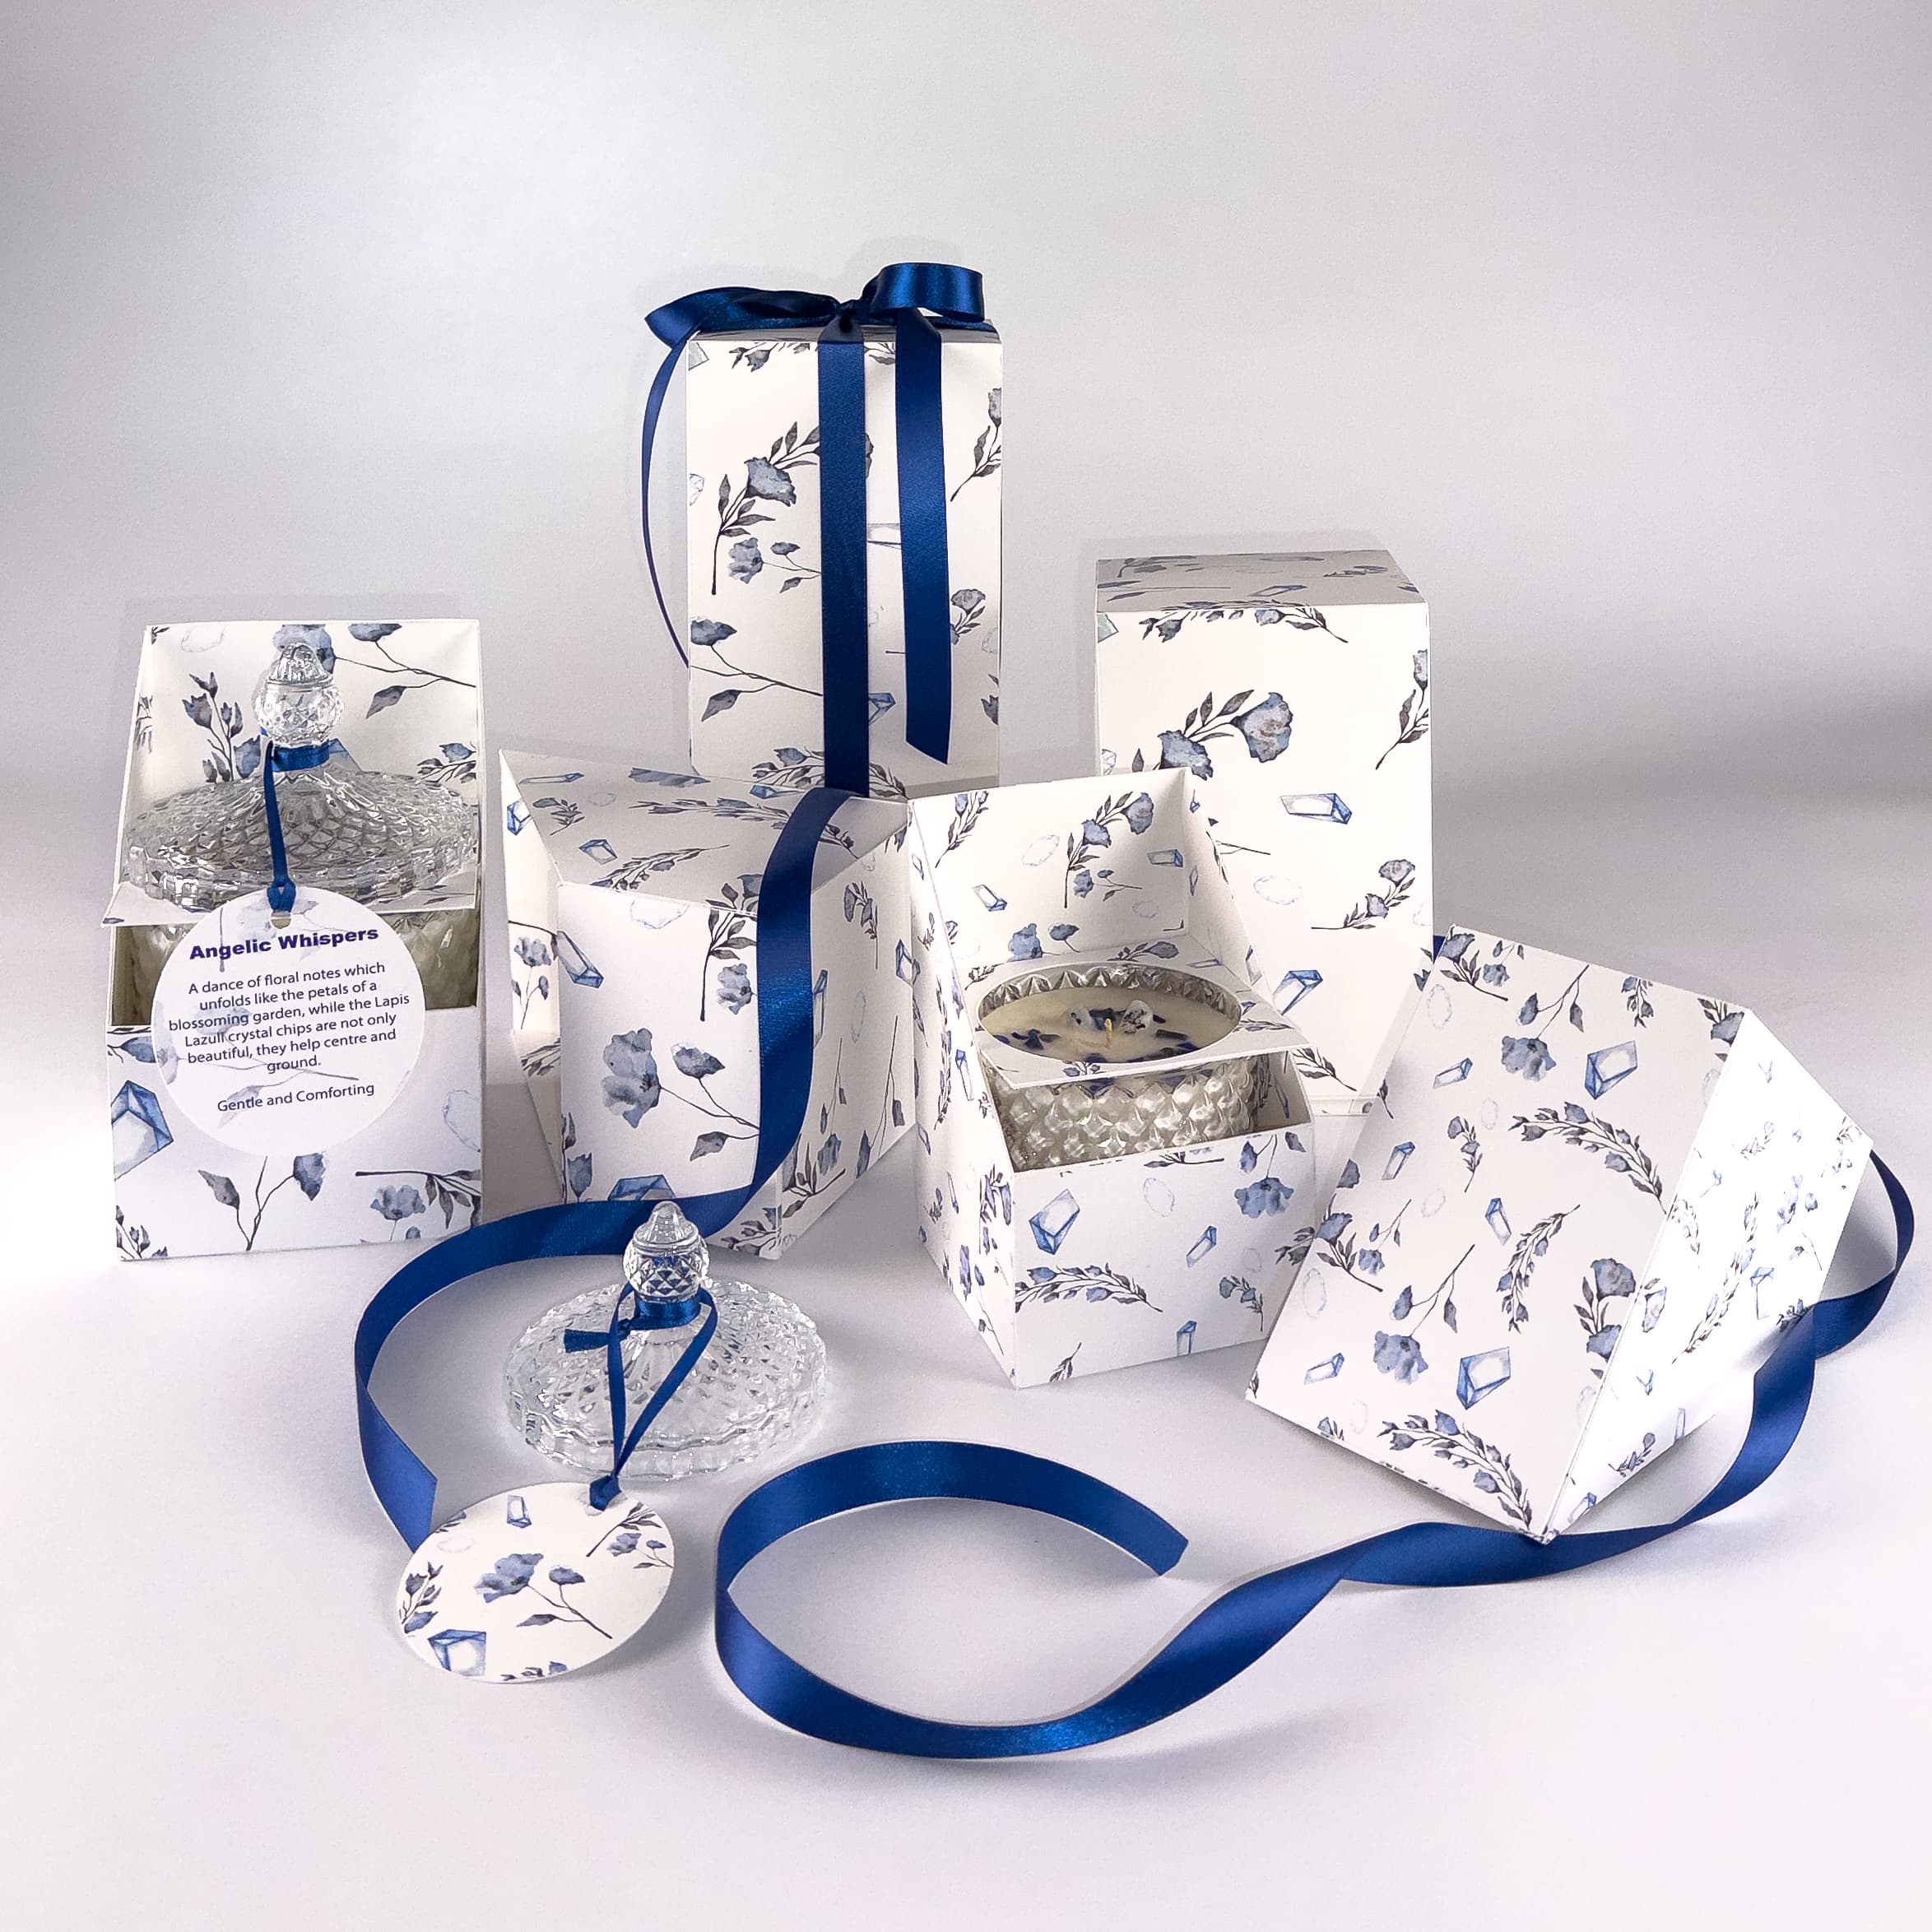 large and standard angelic whispers floral hand poured soy wax candles, beautiful handmade product boxes, tied with navy ribbon